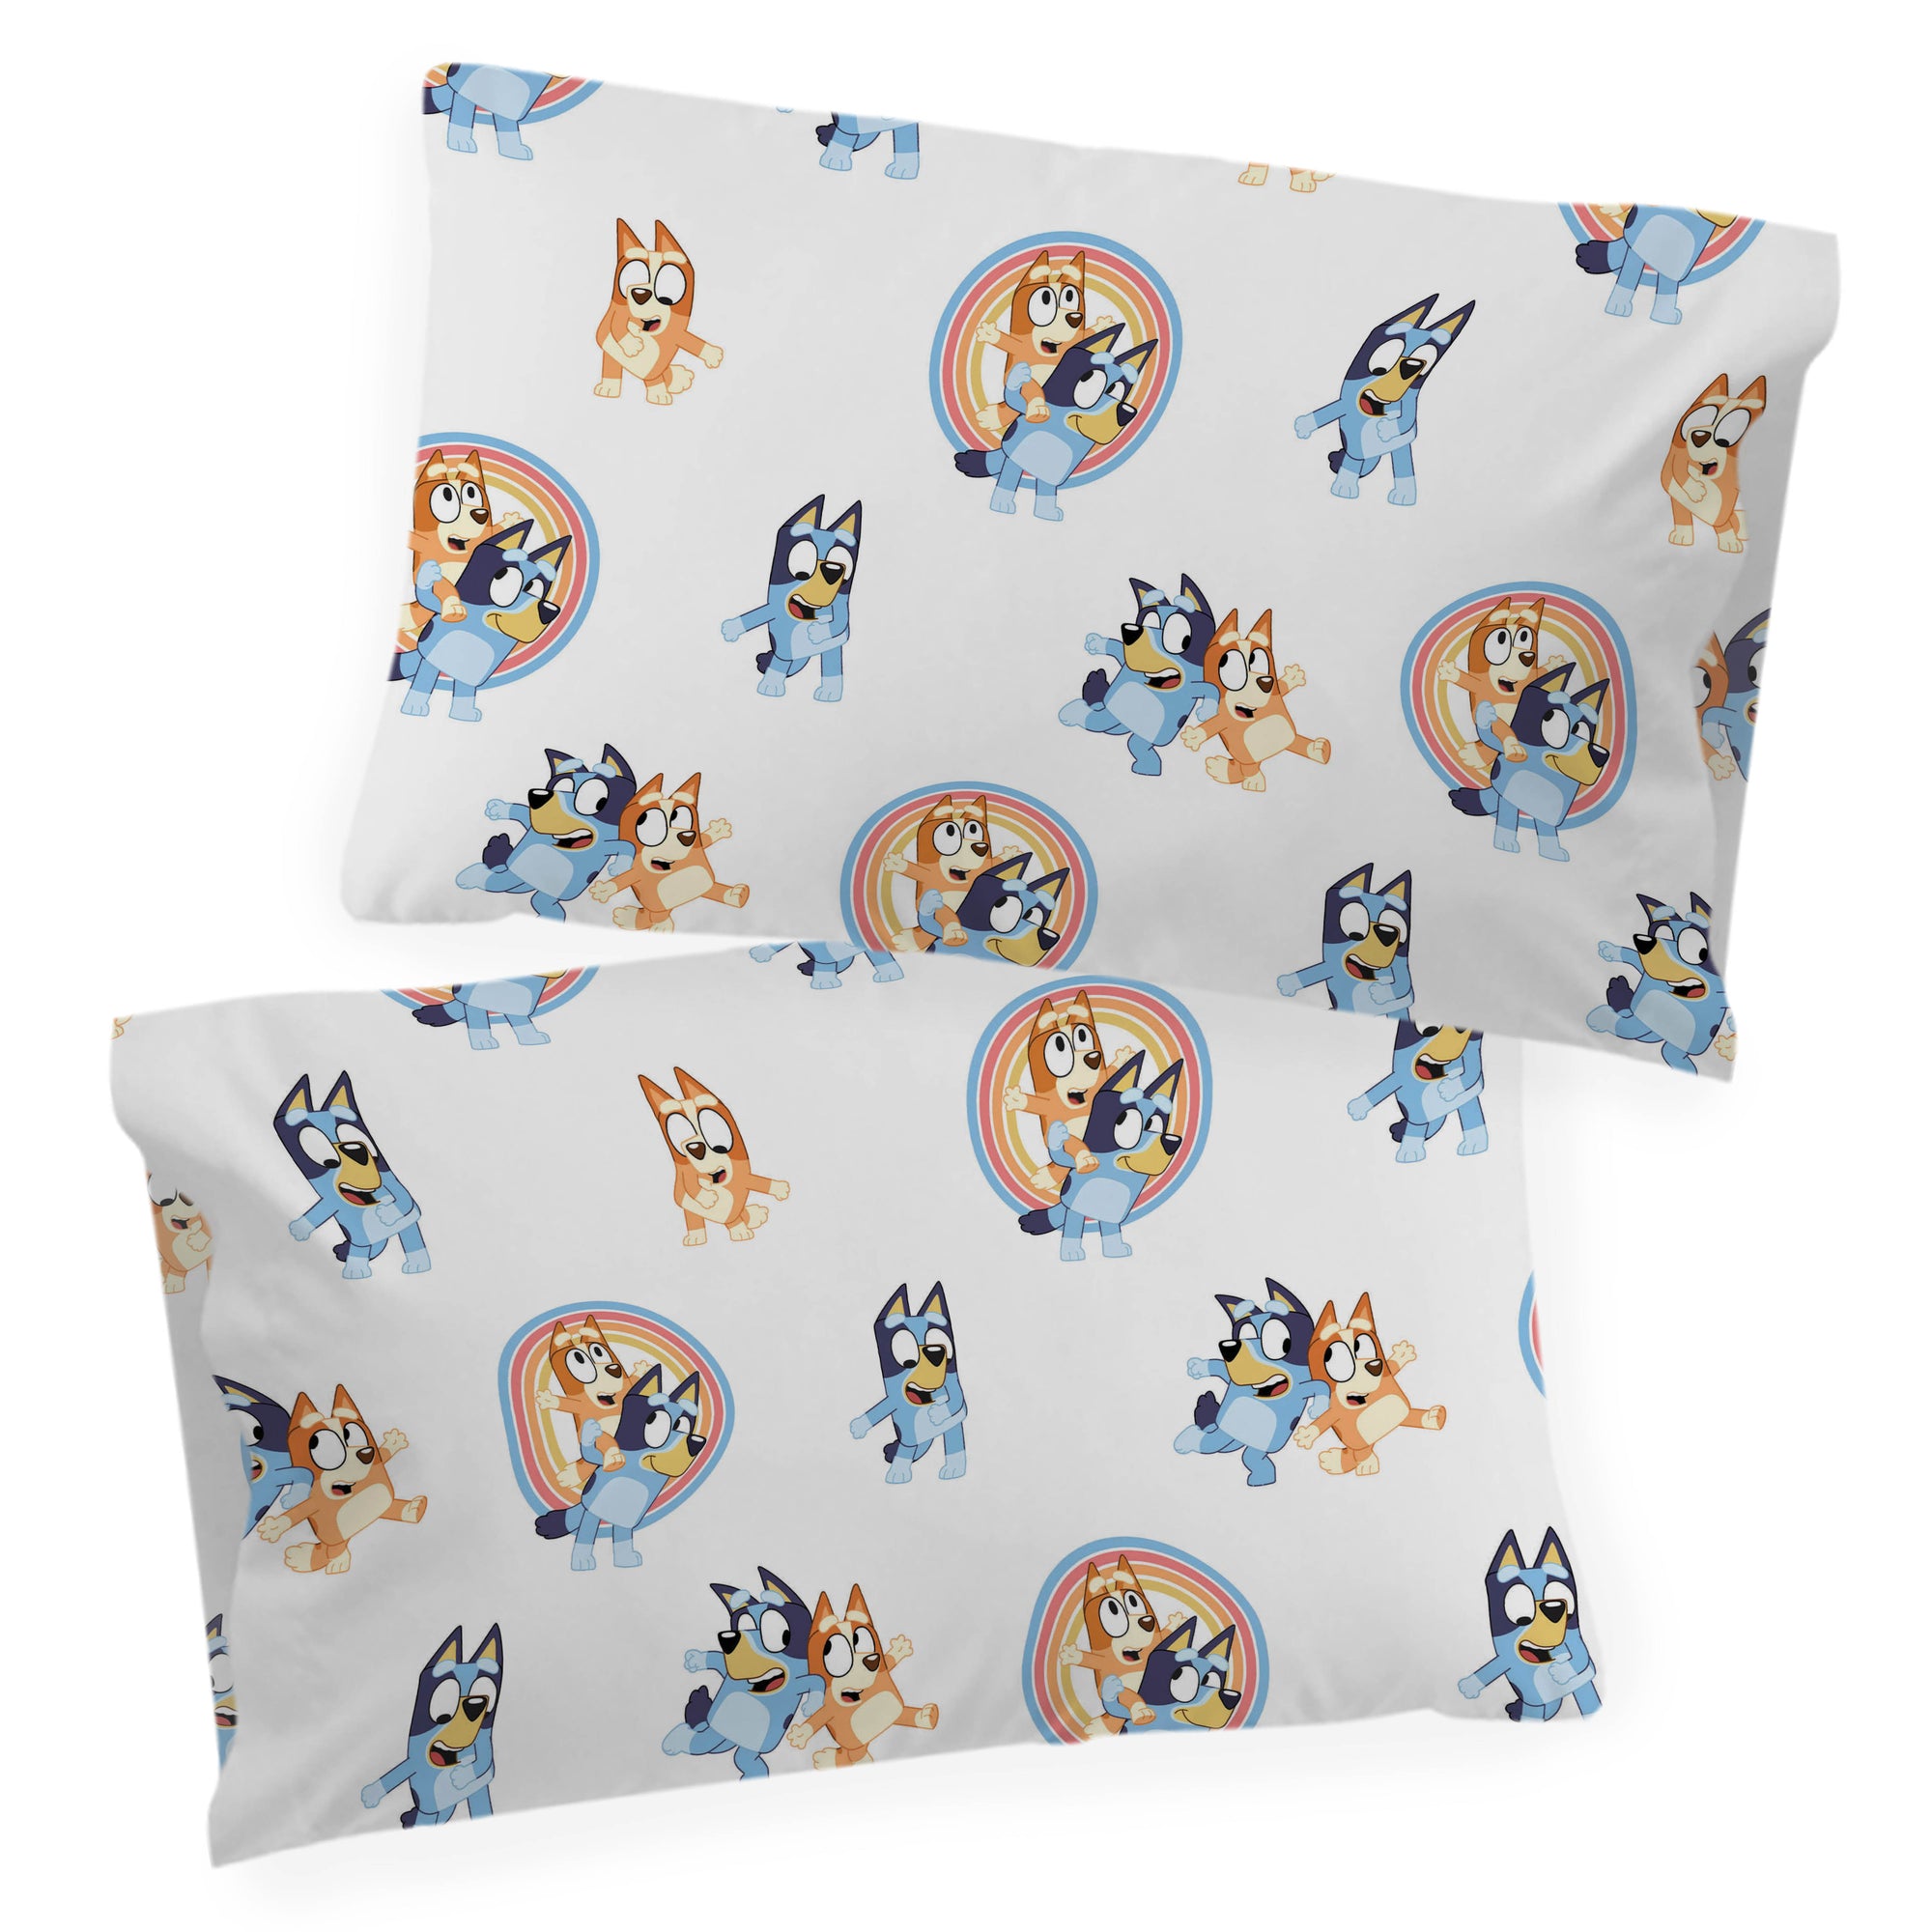 Saturday Park Bluey Rainbow in the Clouds 100% Organic 2 Pack Cotton Pillowcase